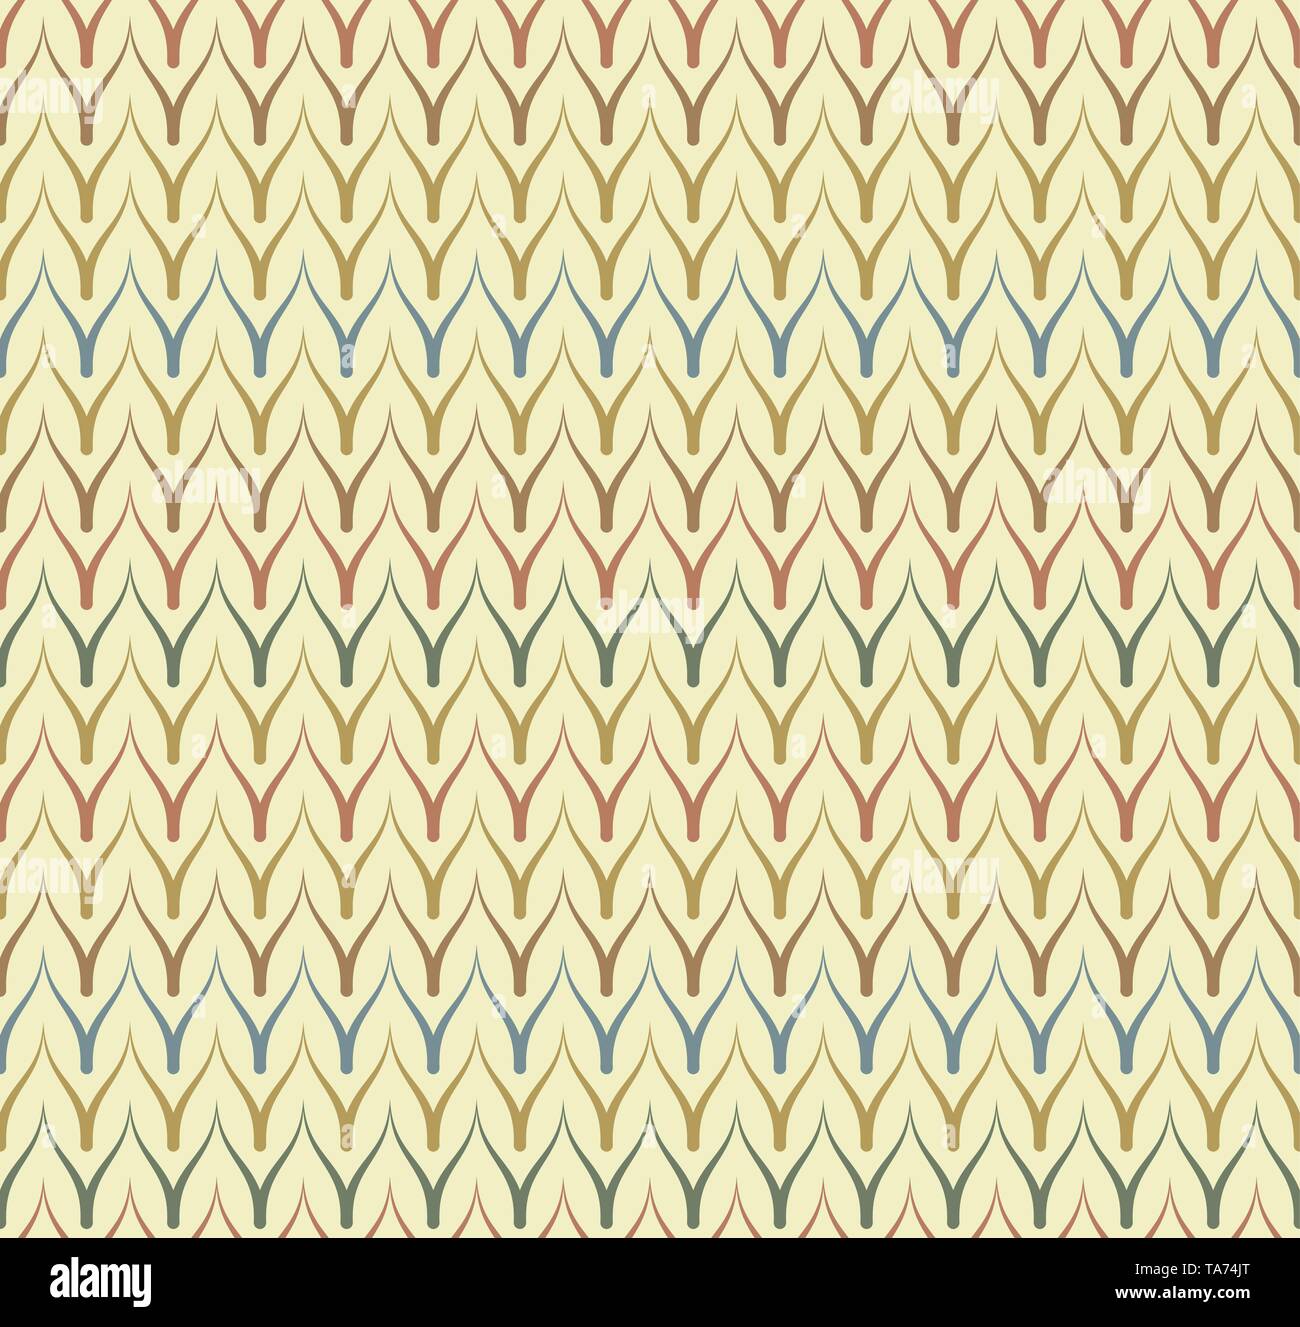 Seamless ethnic textile seamless vector pattern. Geometric thin zig zag native print. Folk mexican ornament. Ancient african style design. Simple line Stock Vector